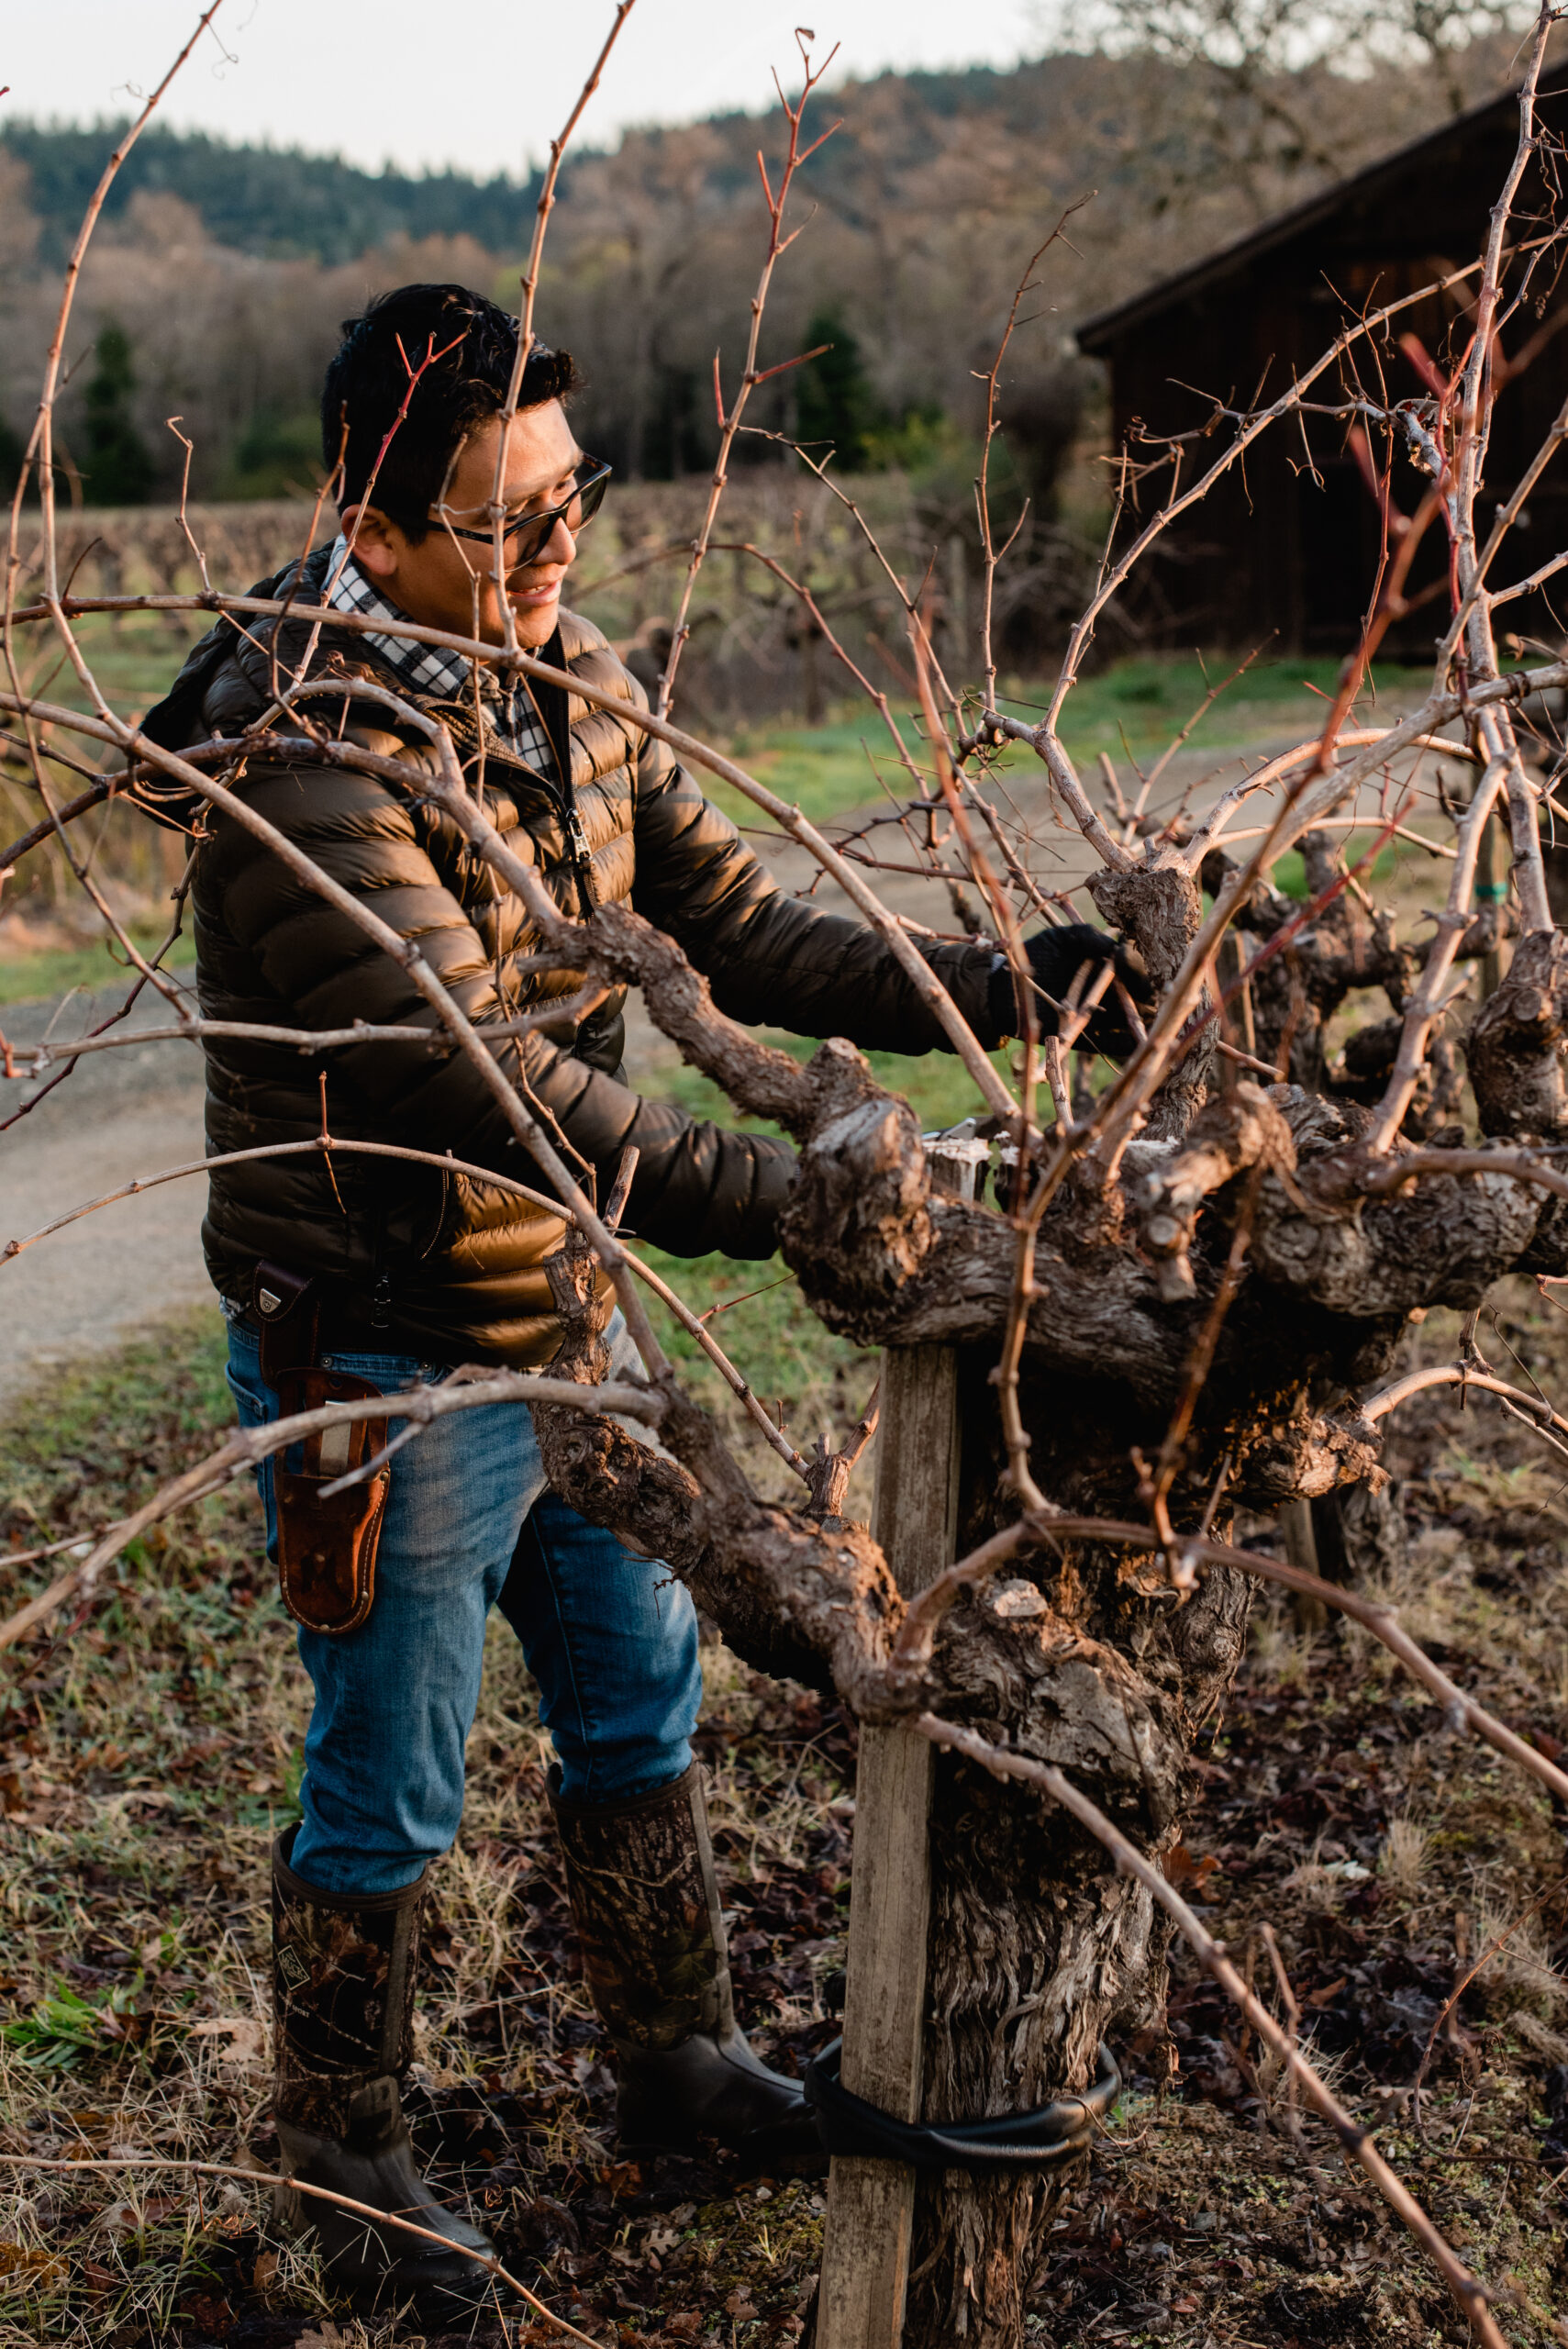 Marco Garcia is Capo Vineyard Manager